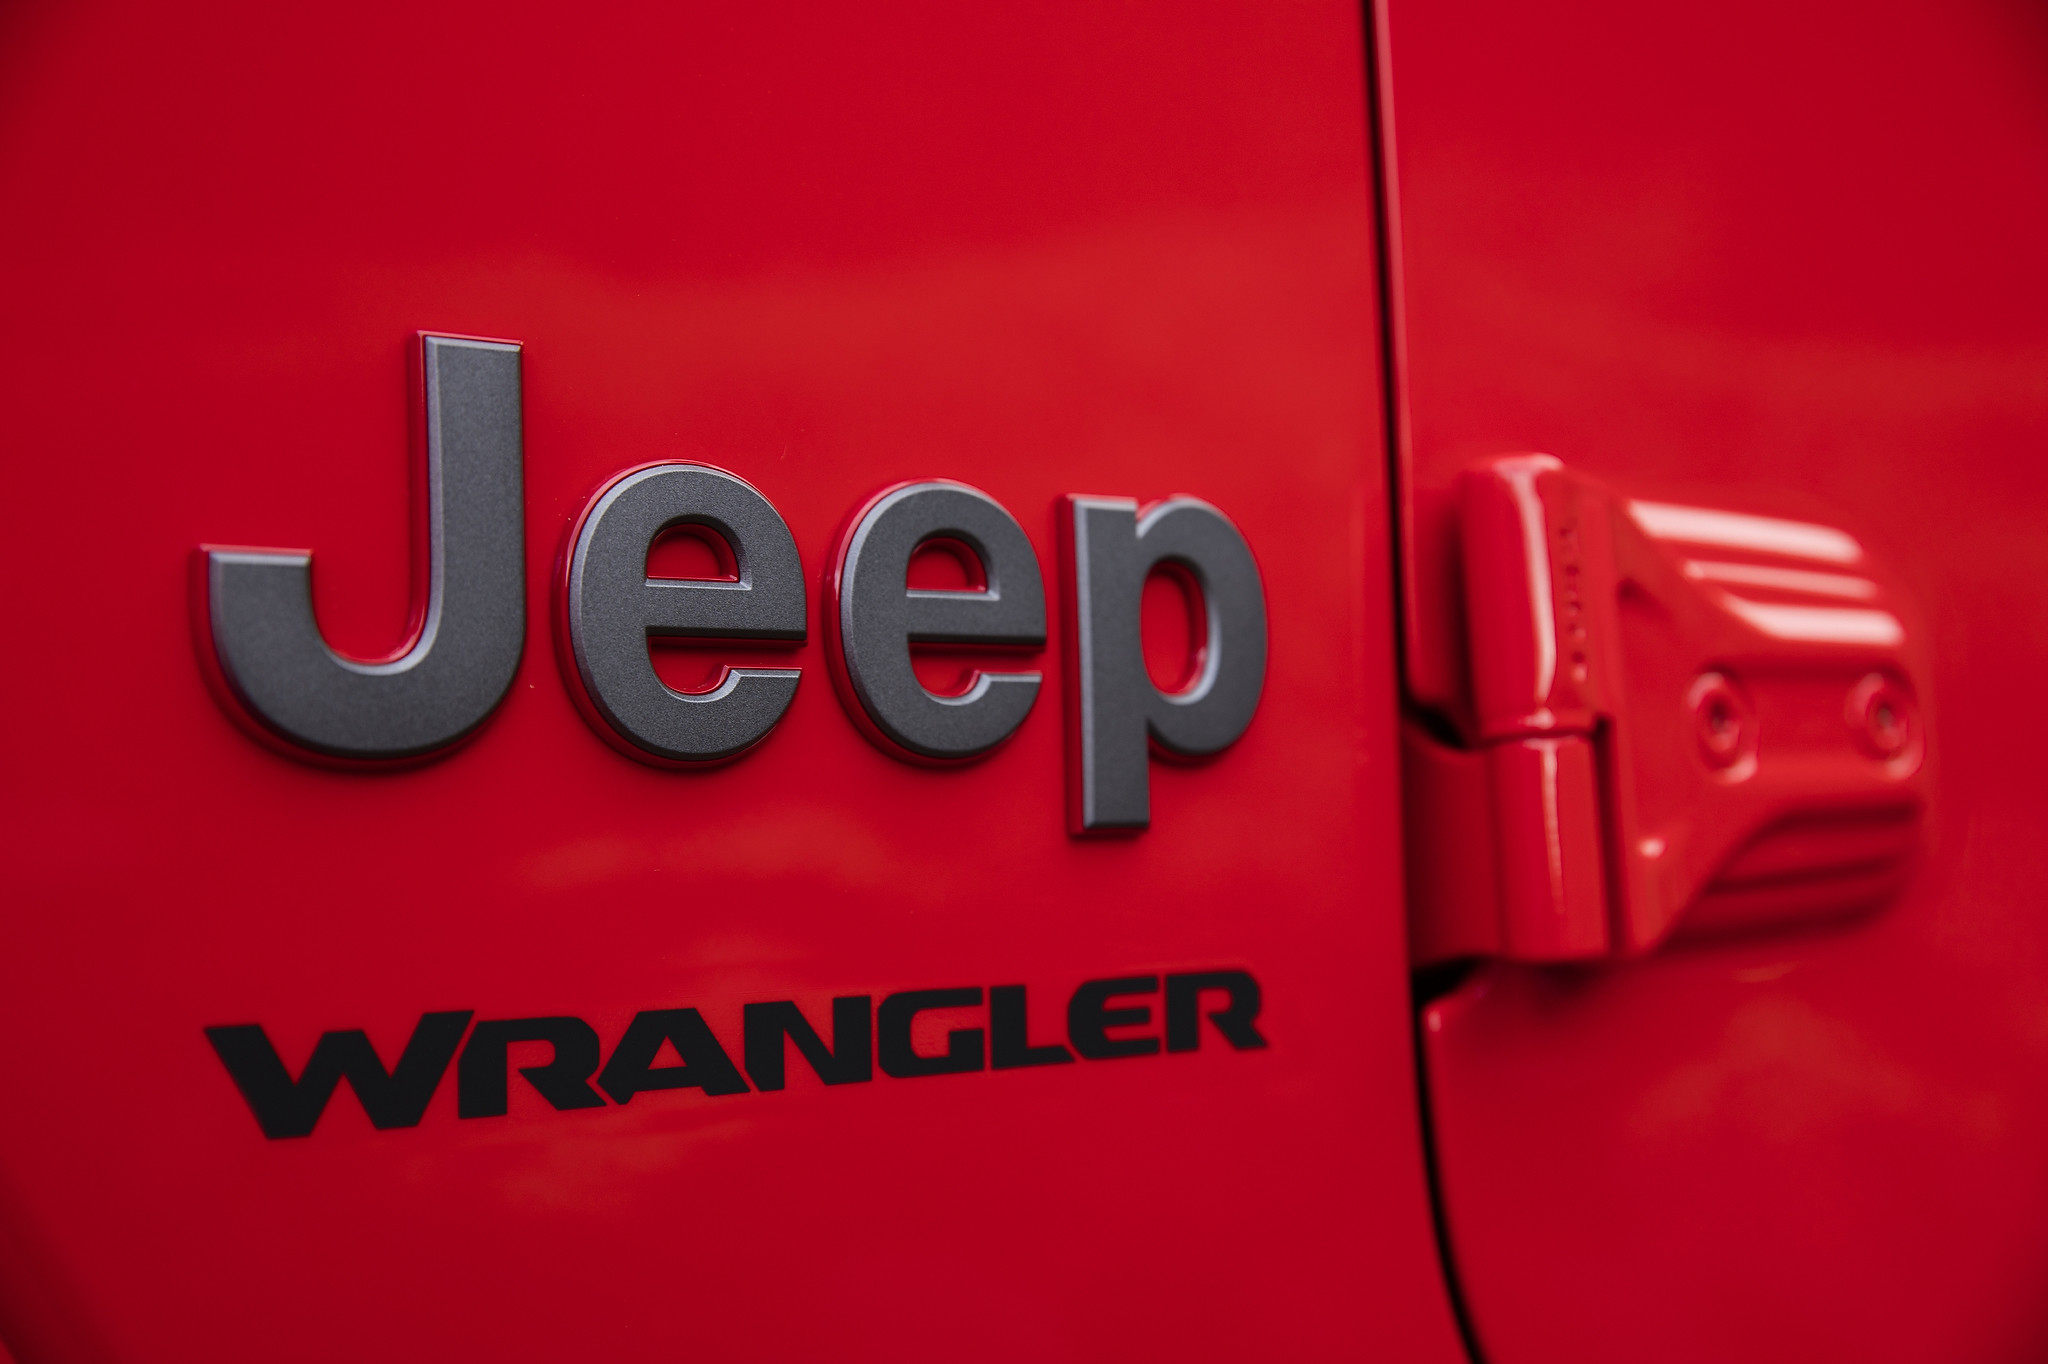 The Long History Of The Jeep Wrangler | Jeep Canada